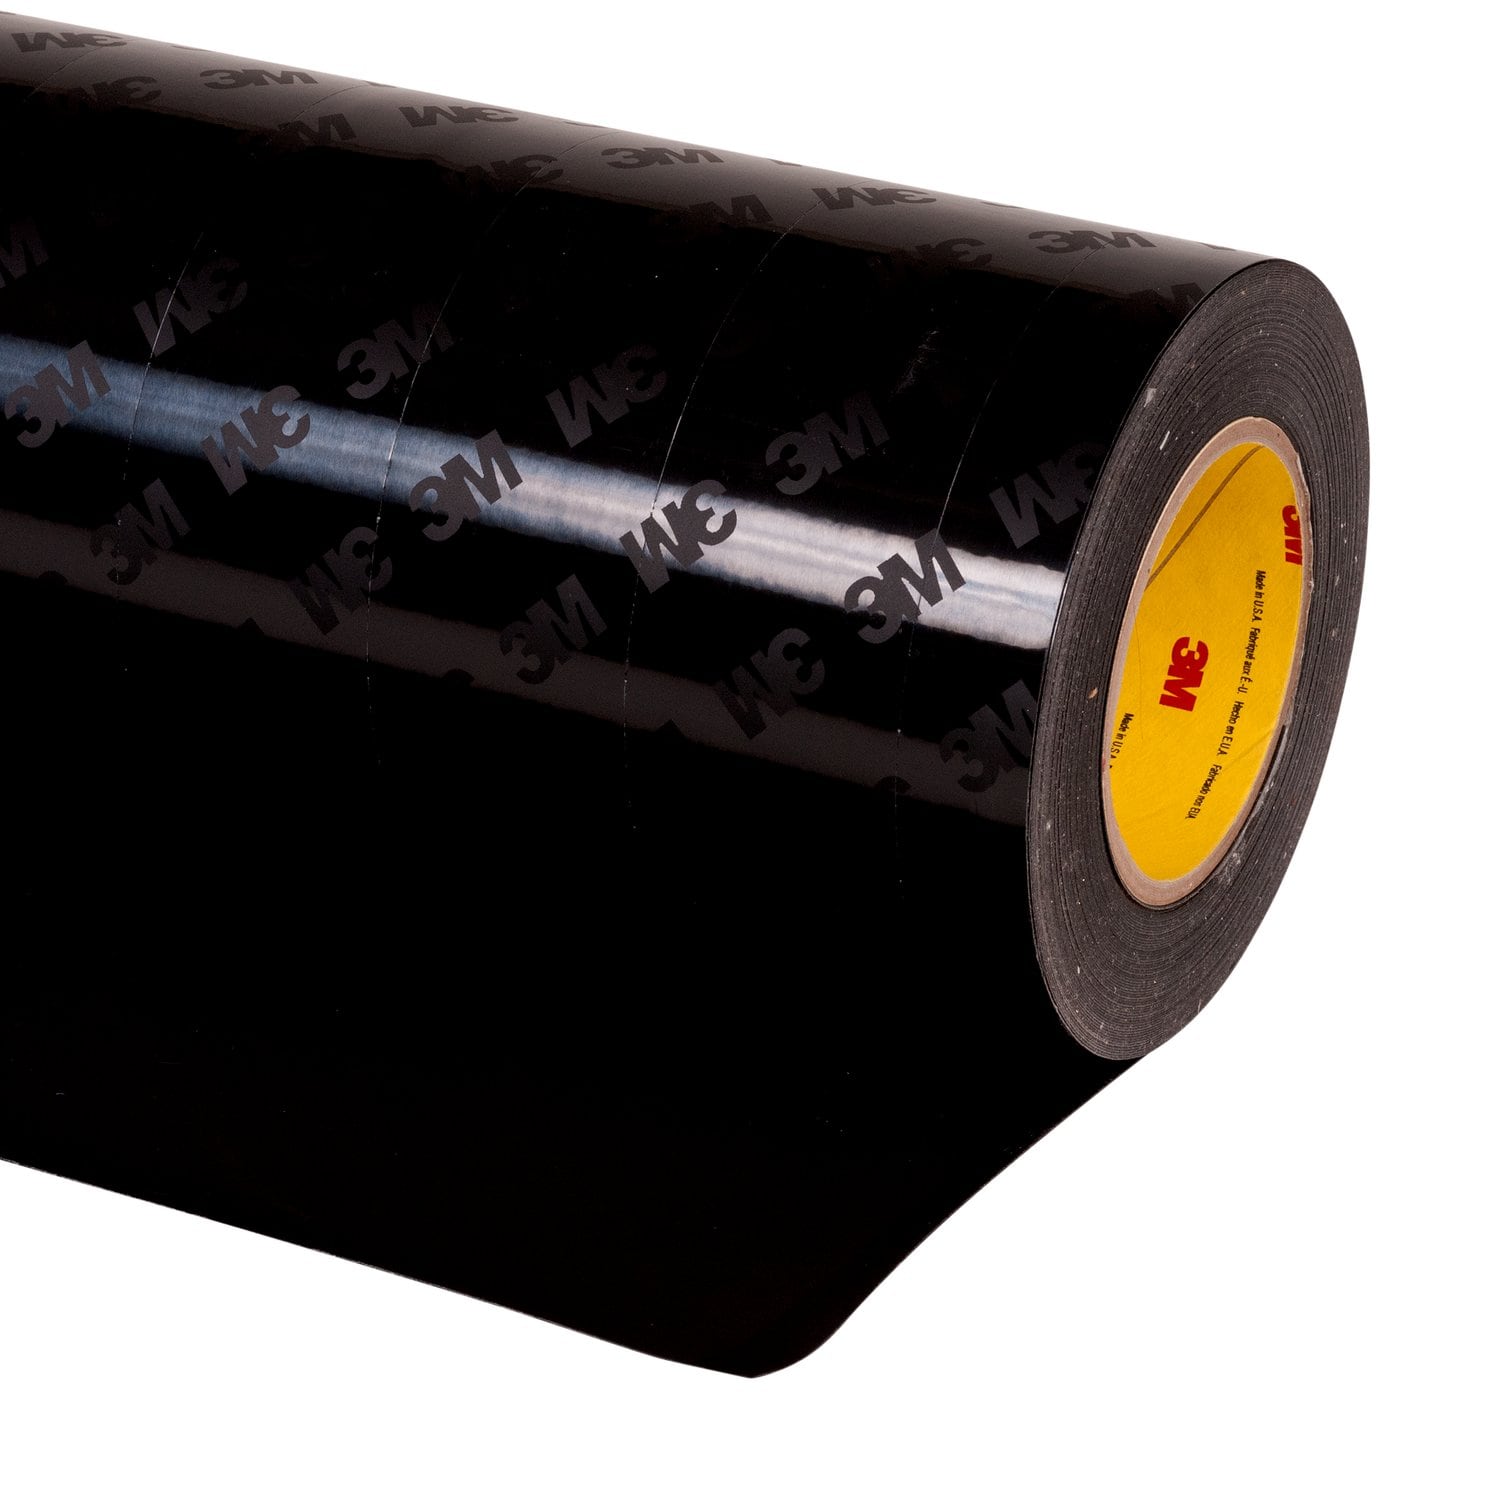 7000048650 - 3M Polyurethane Protective Tape 8544, Black, 1 in x 36 yd